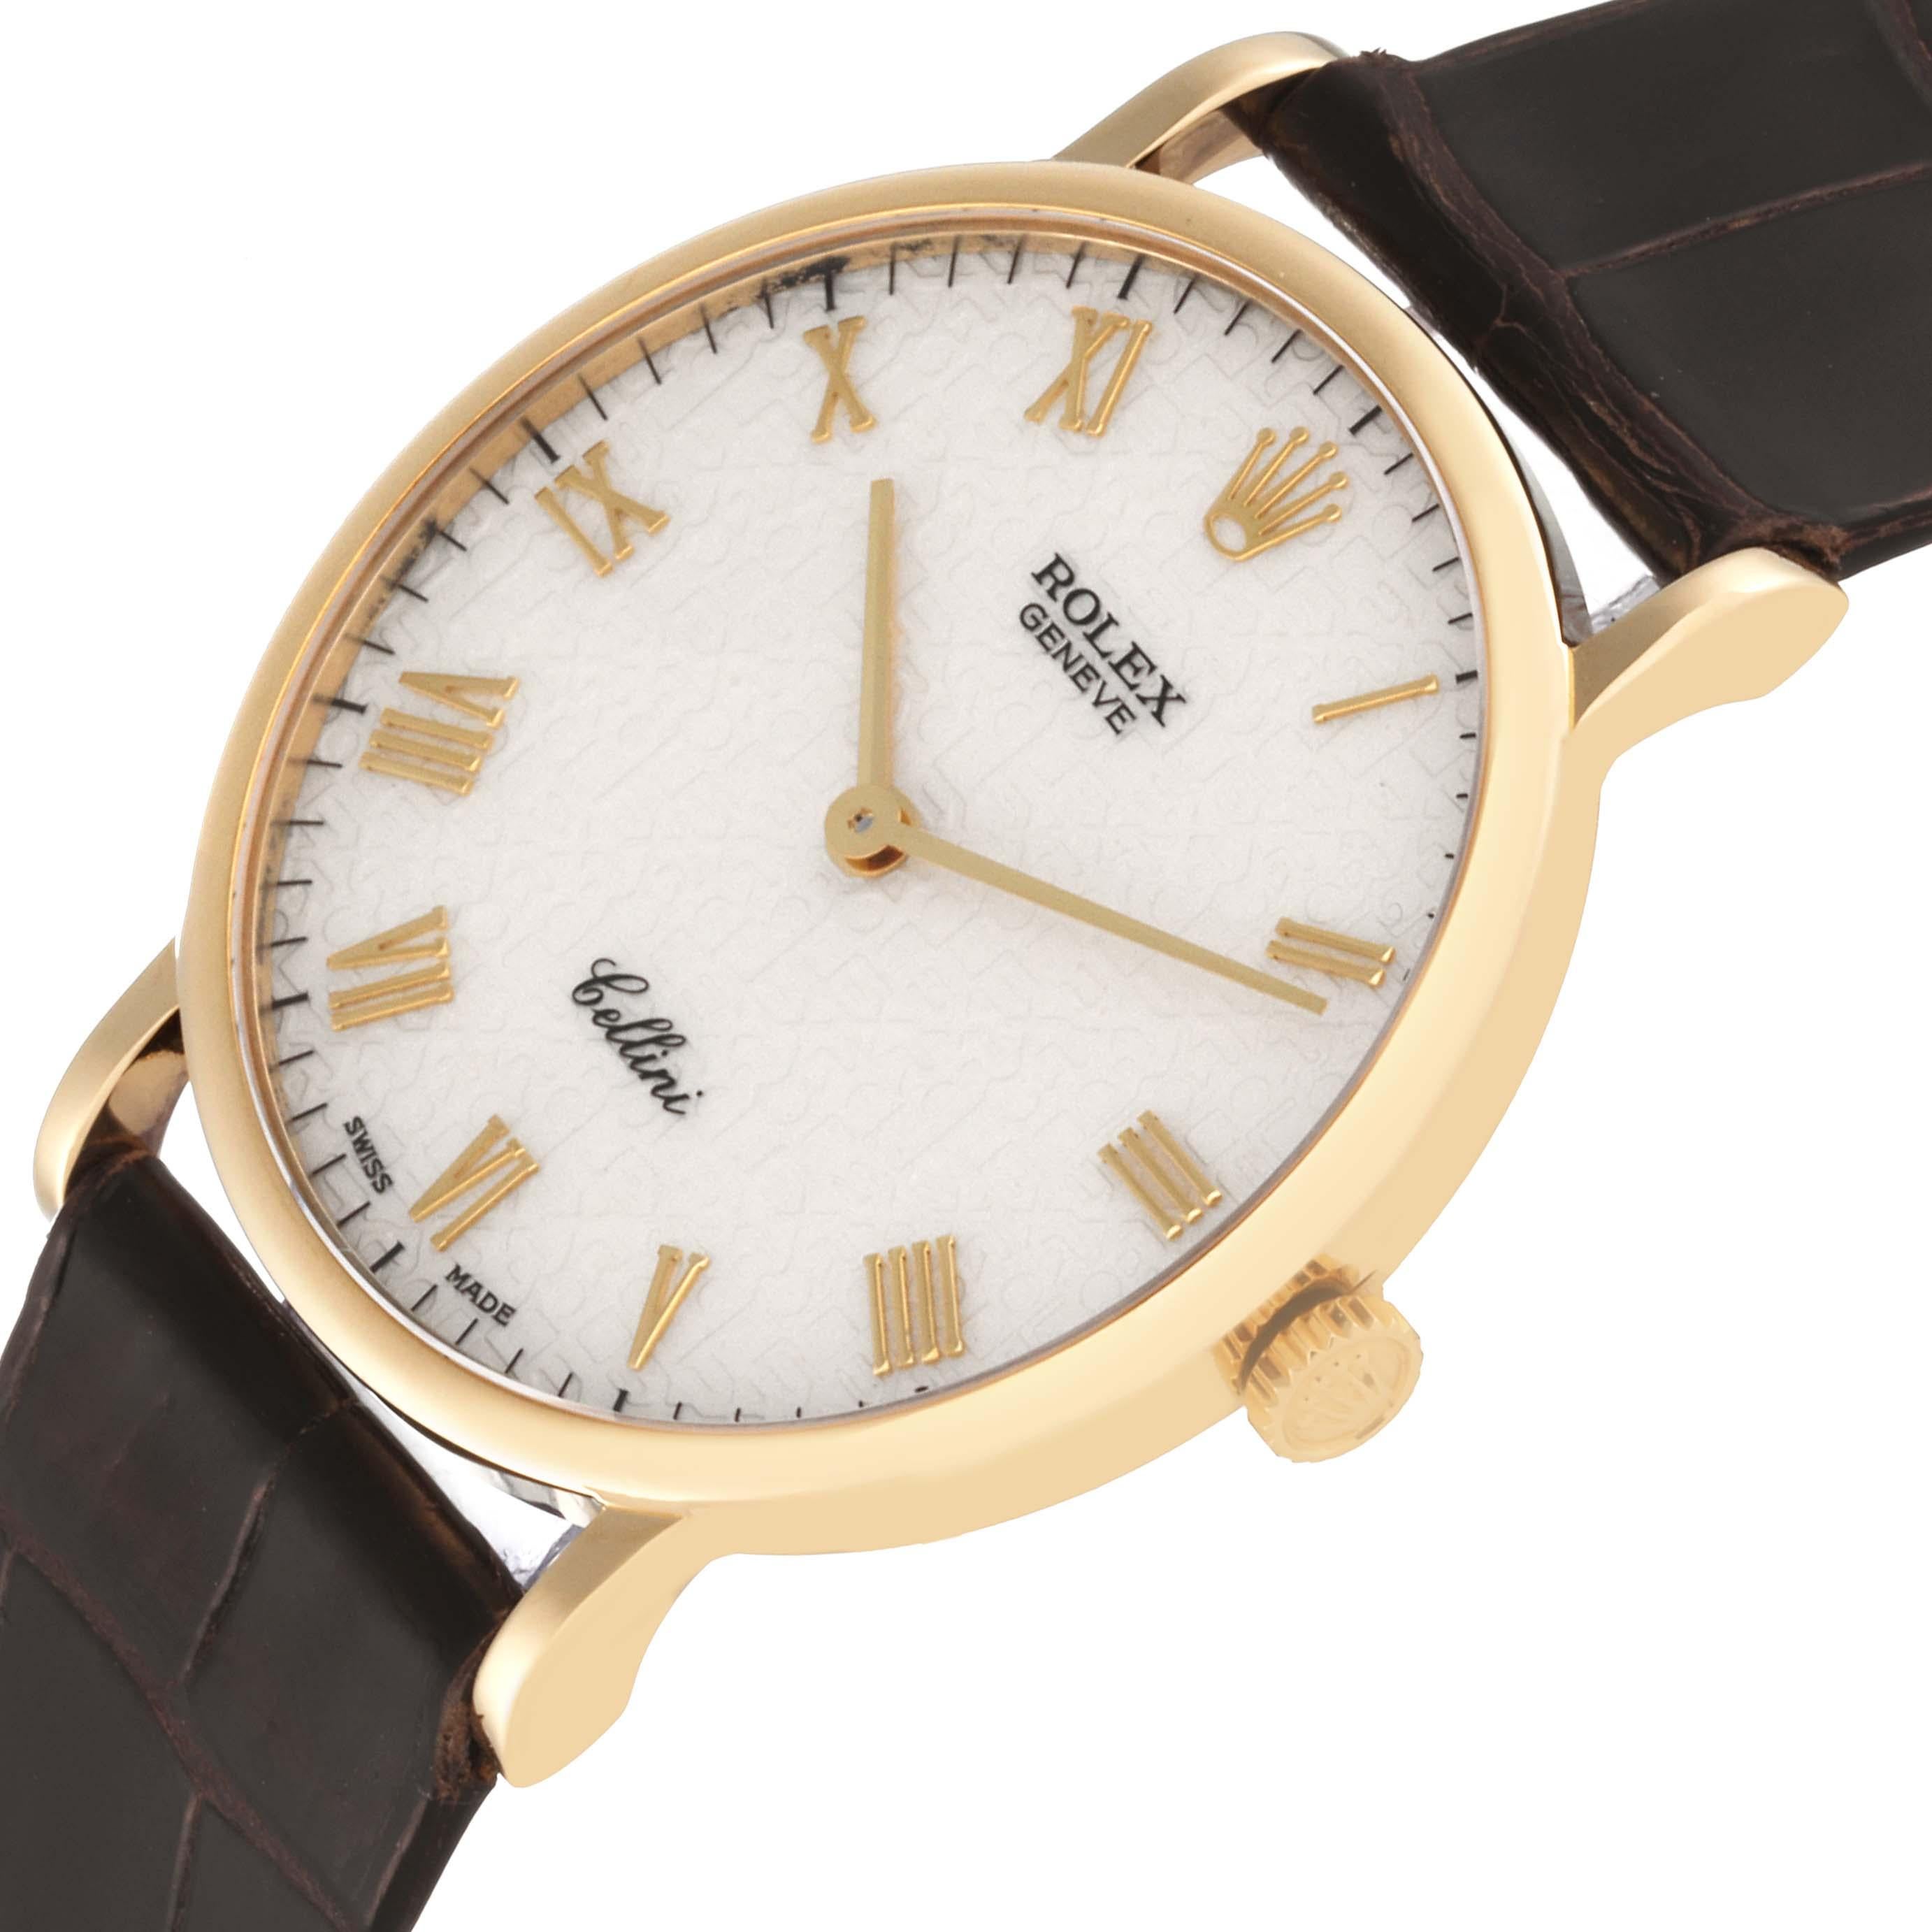 Rolex Cellini Classic Yellow Gold Anniversary Dial Brown Strap Watch 5112 2